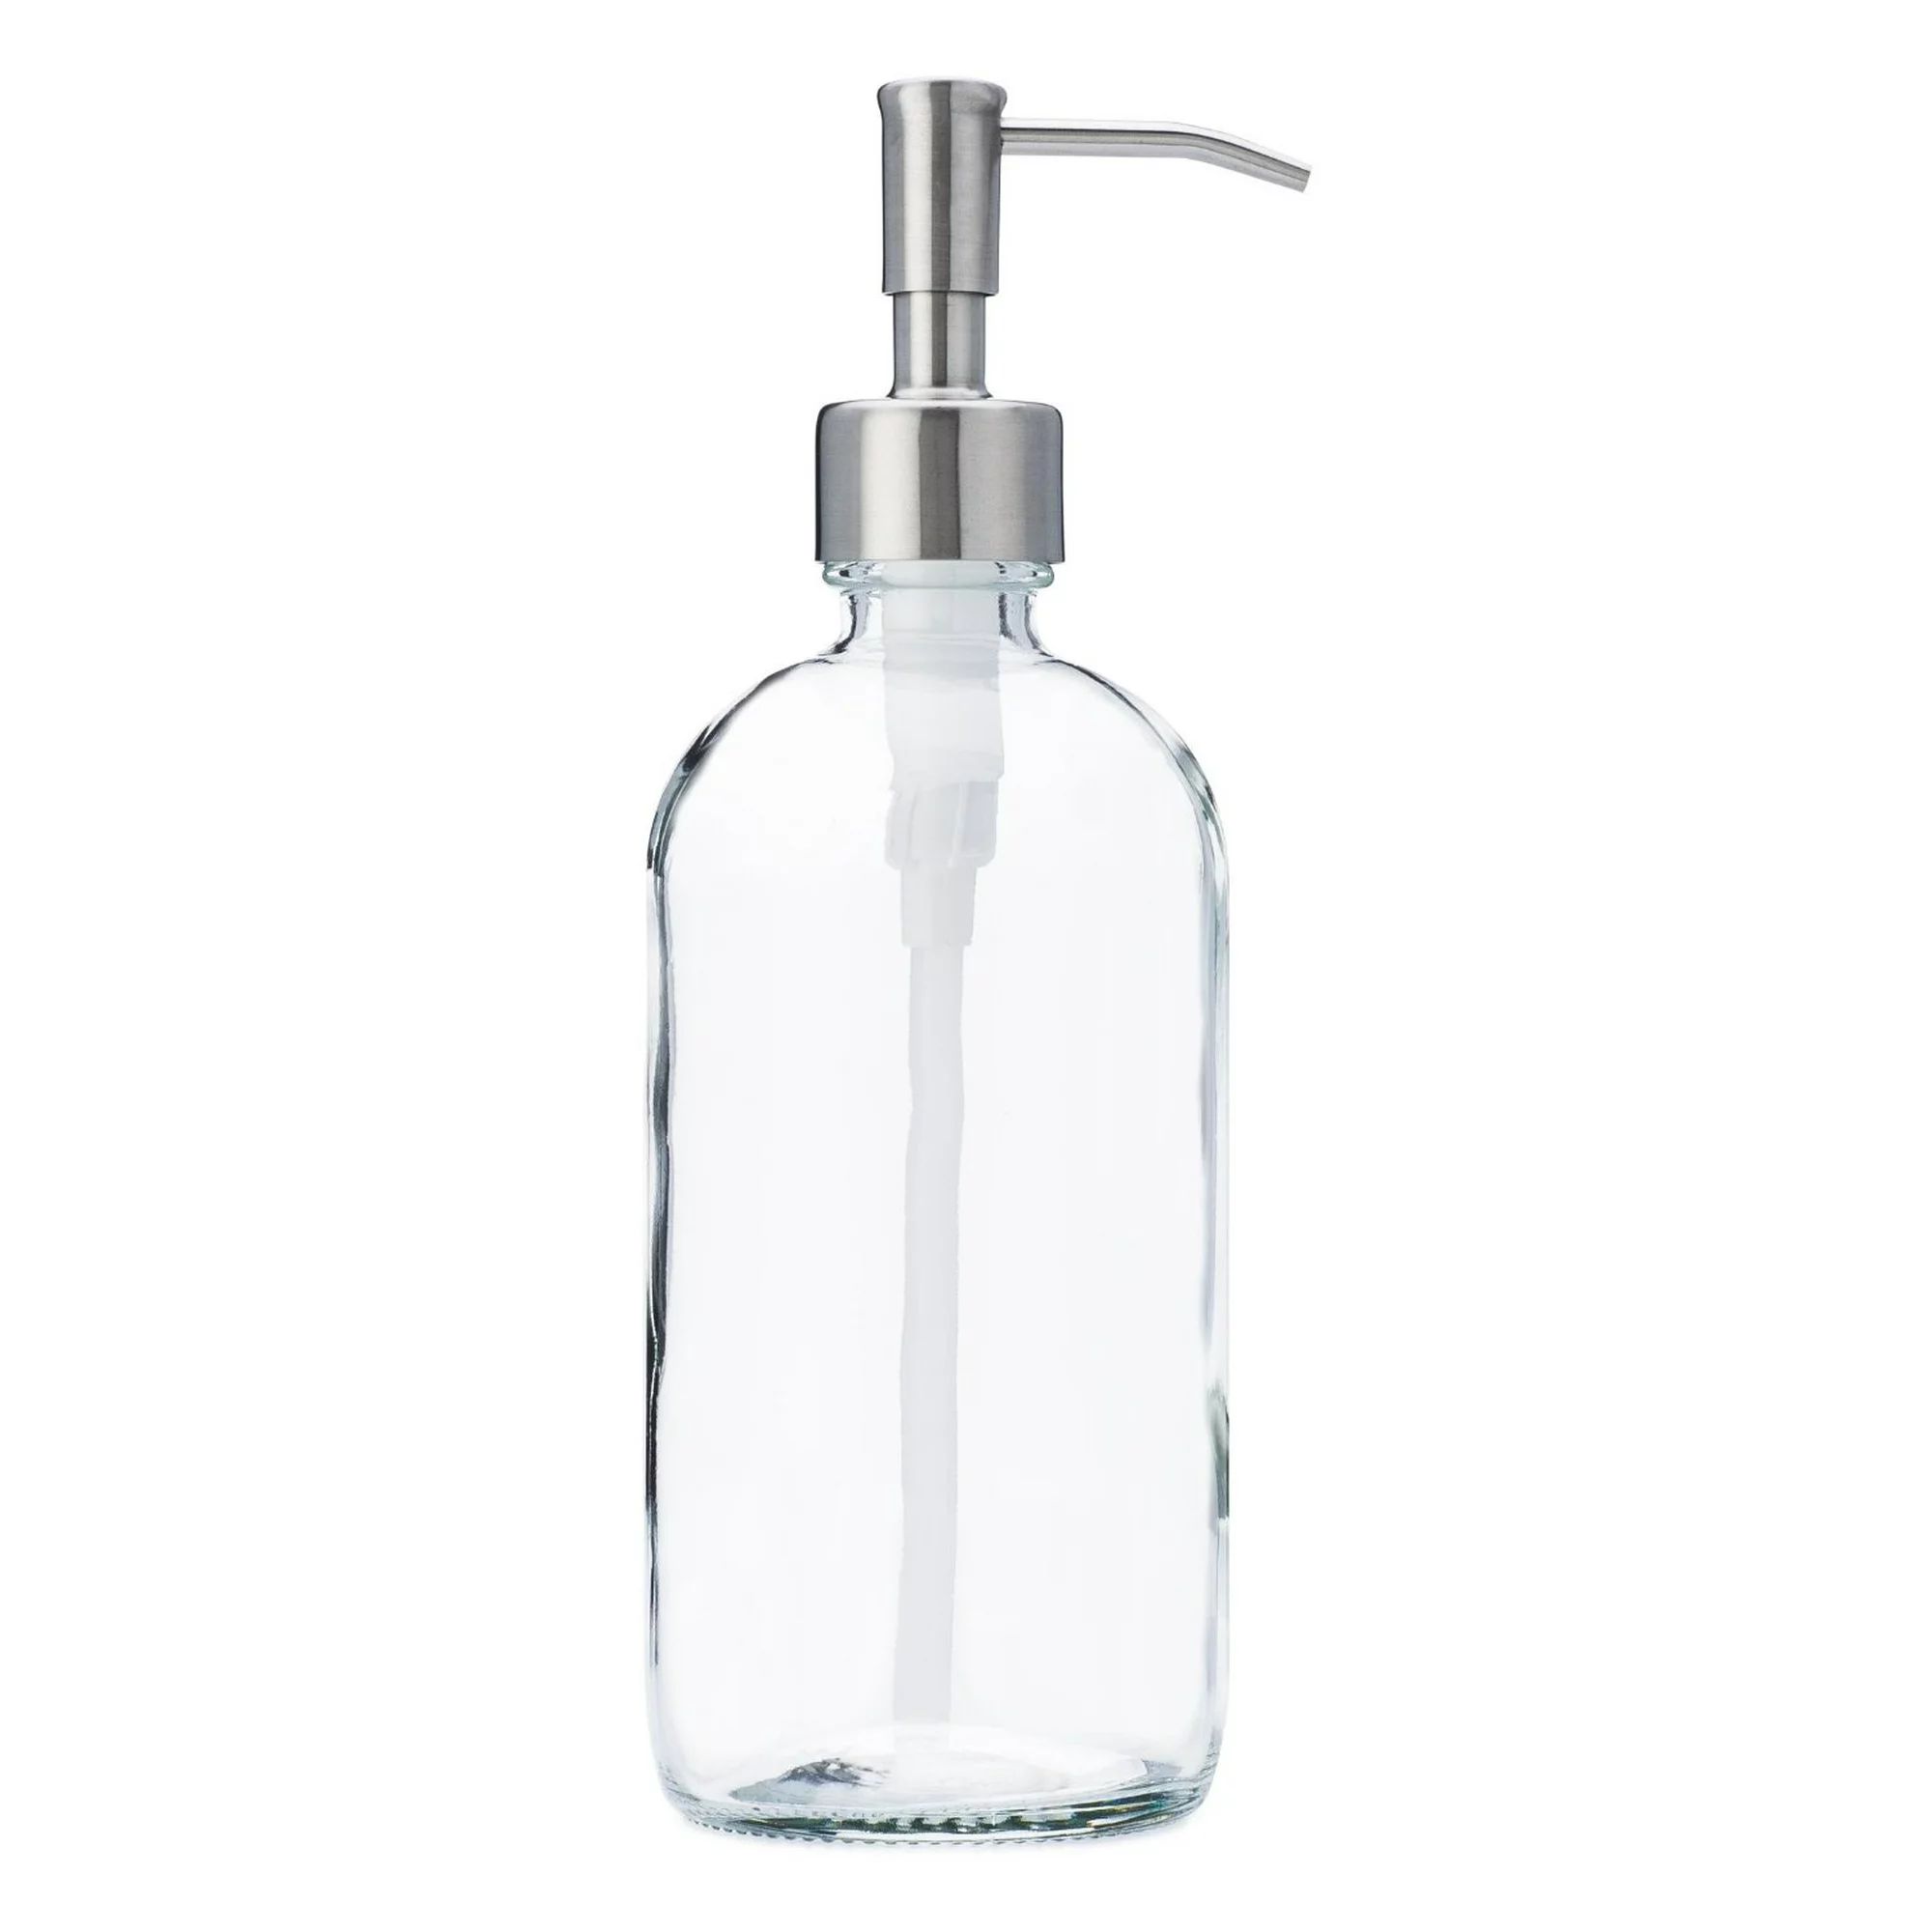 Clear Glass Jar Soap and Lotion Dispenser with Stainless Steel Pump - 16 oz | Walmart (US)